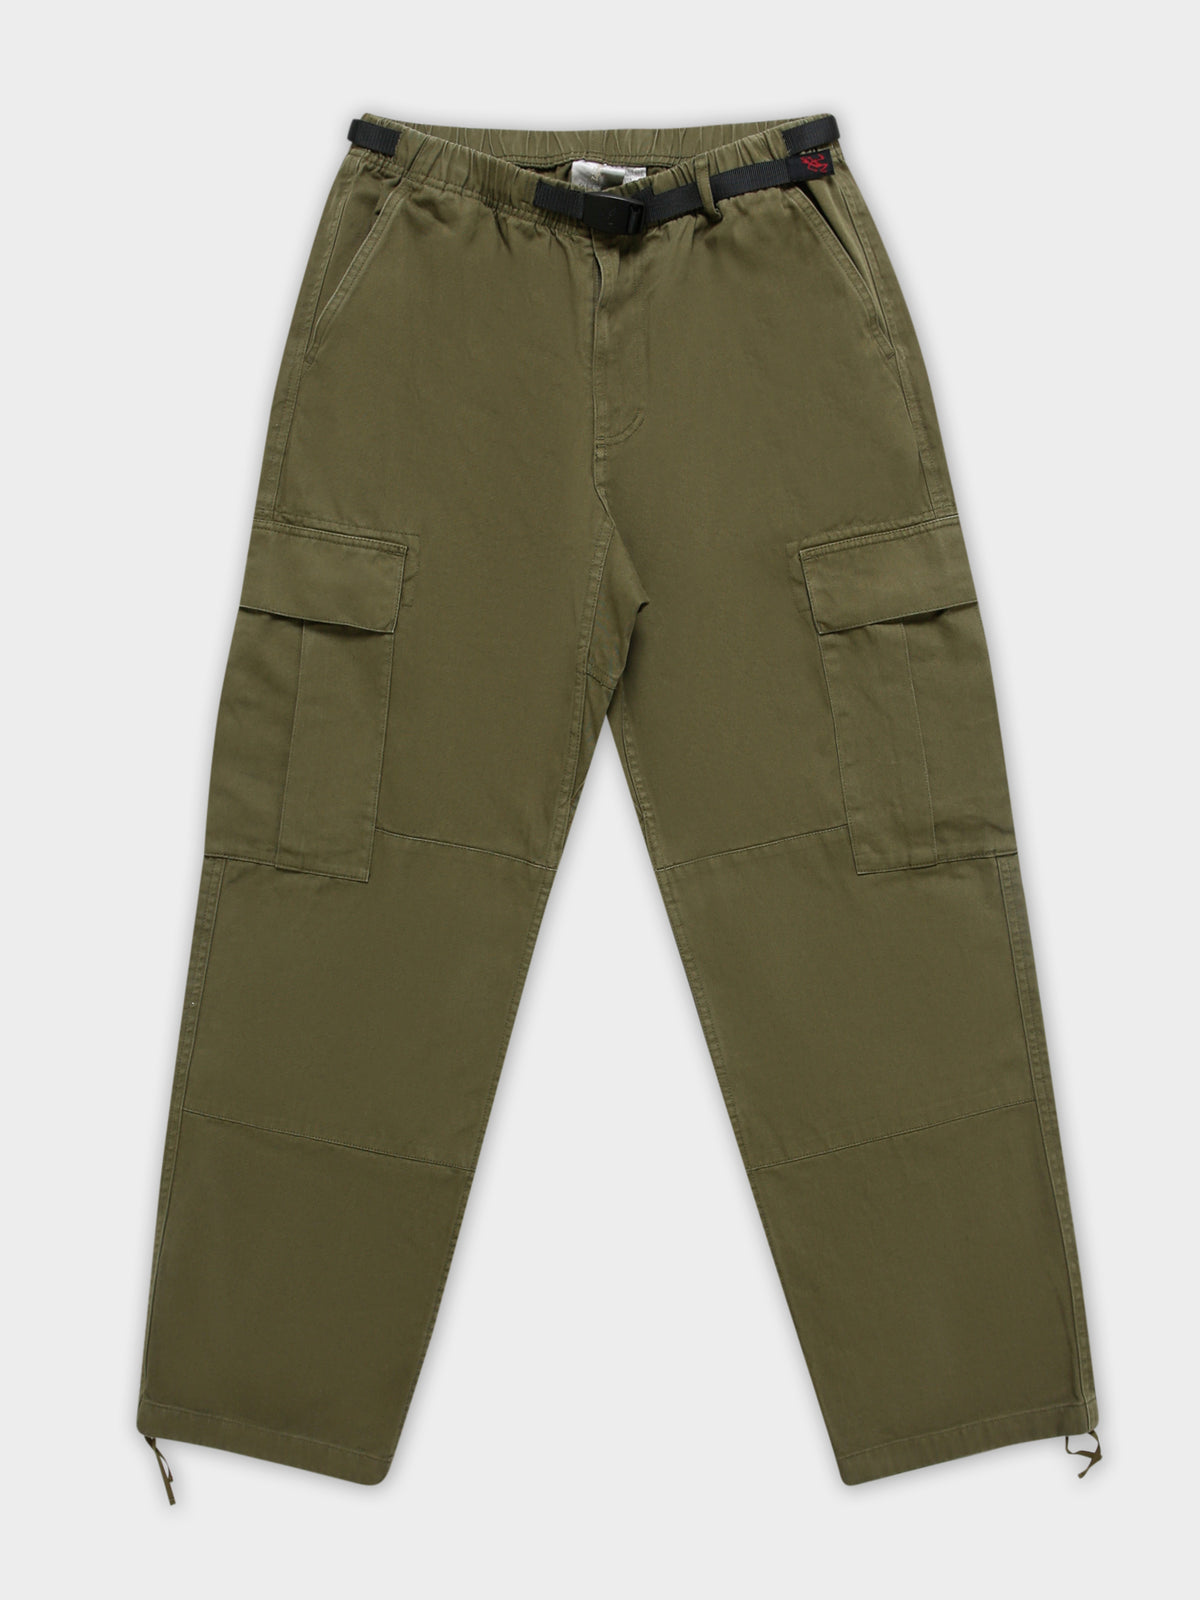 Cargo Pants in Olive